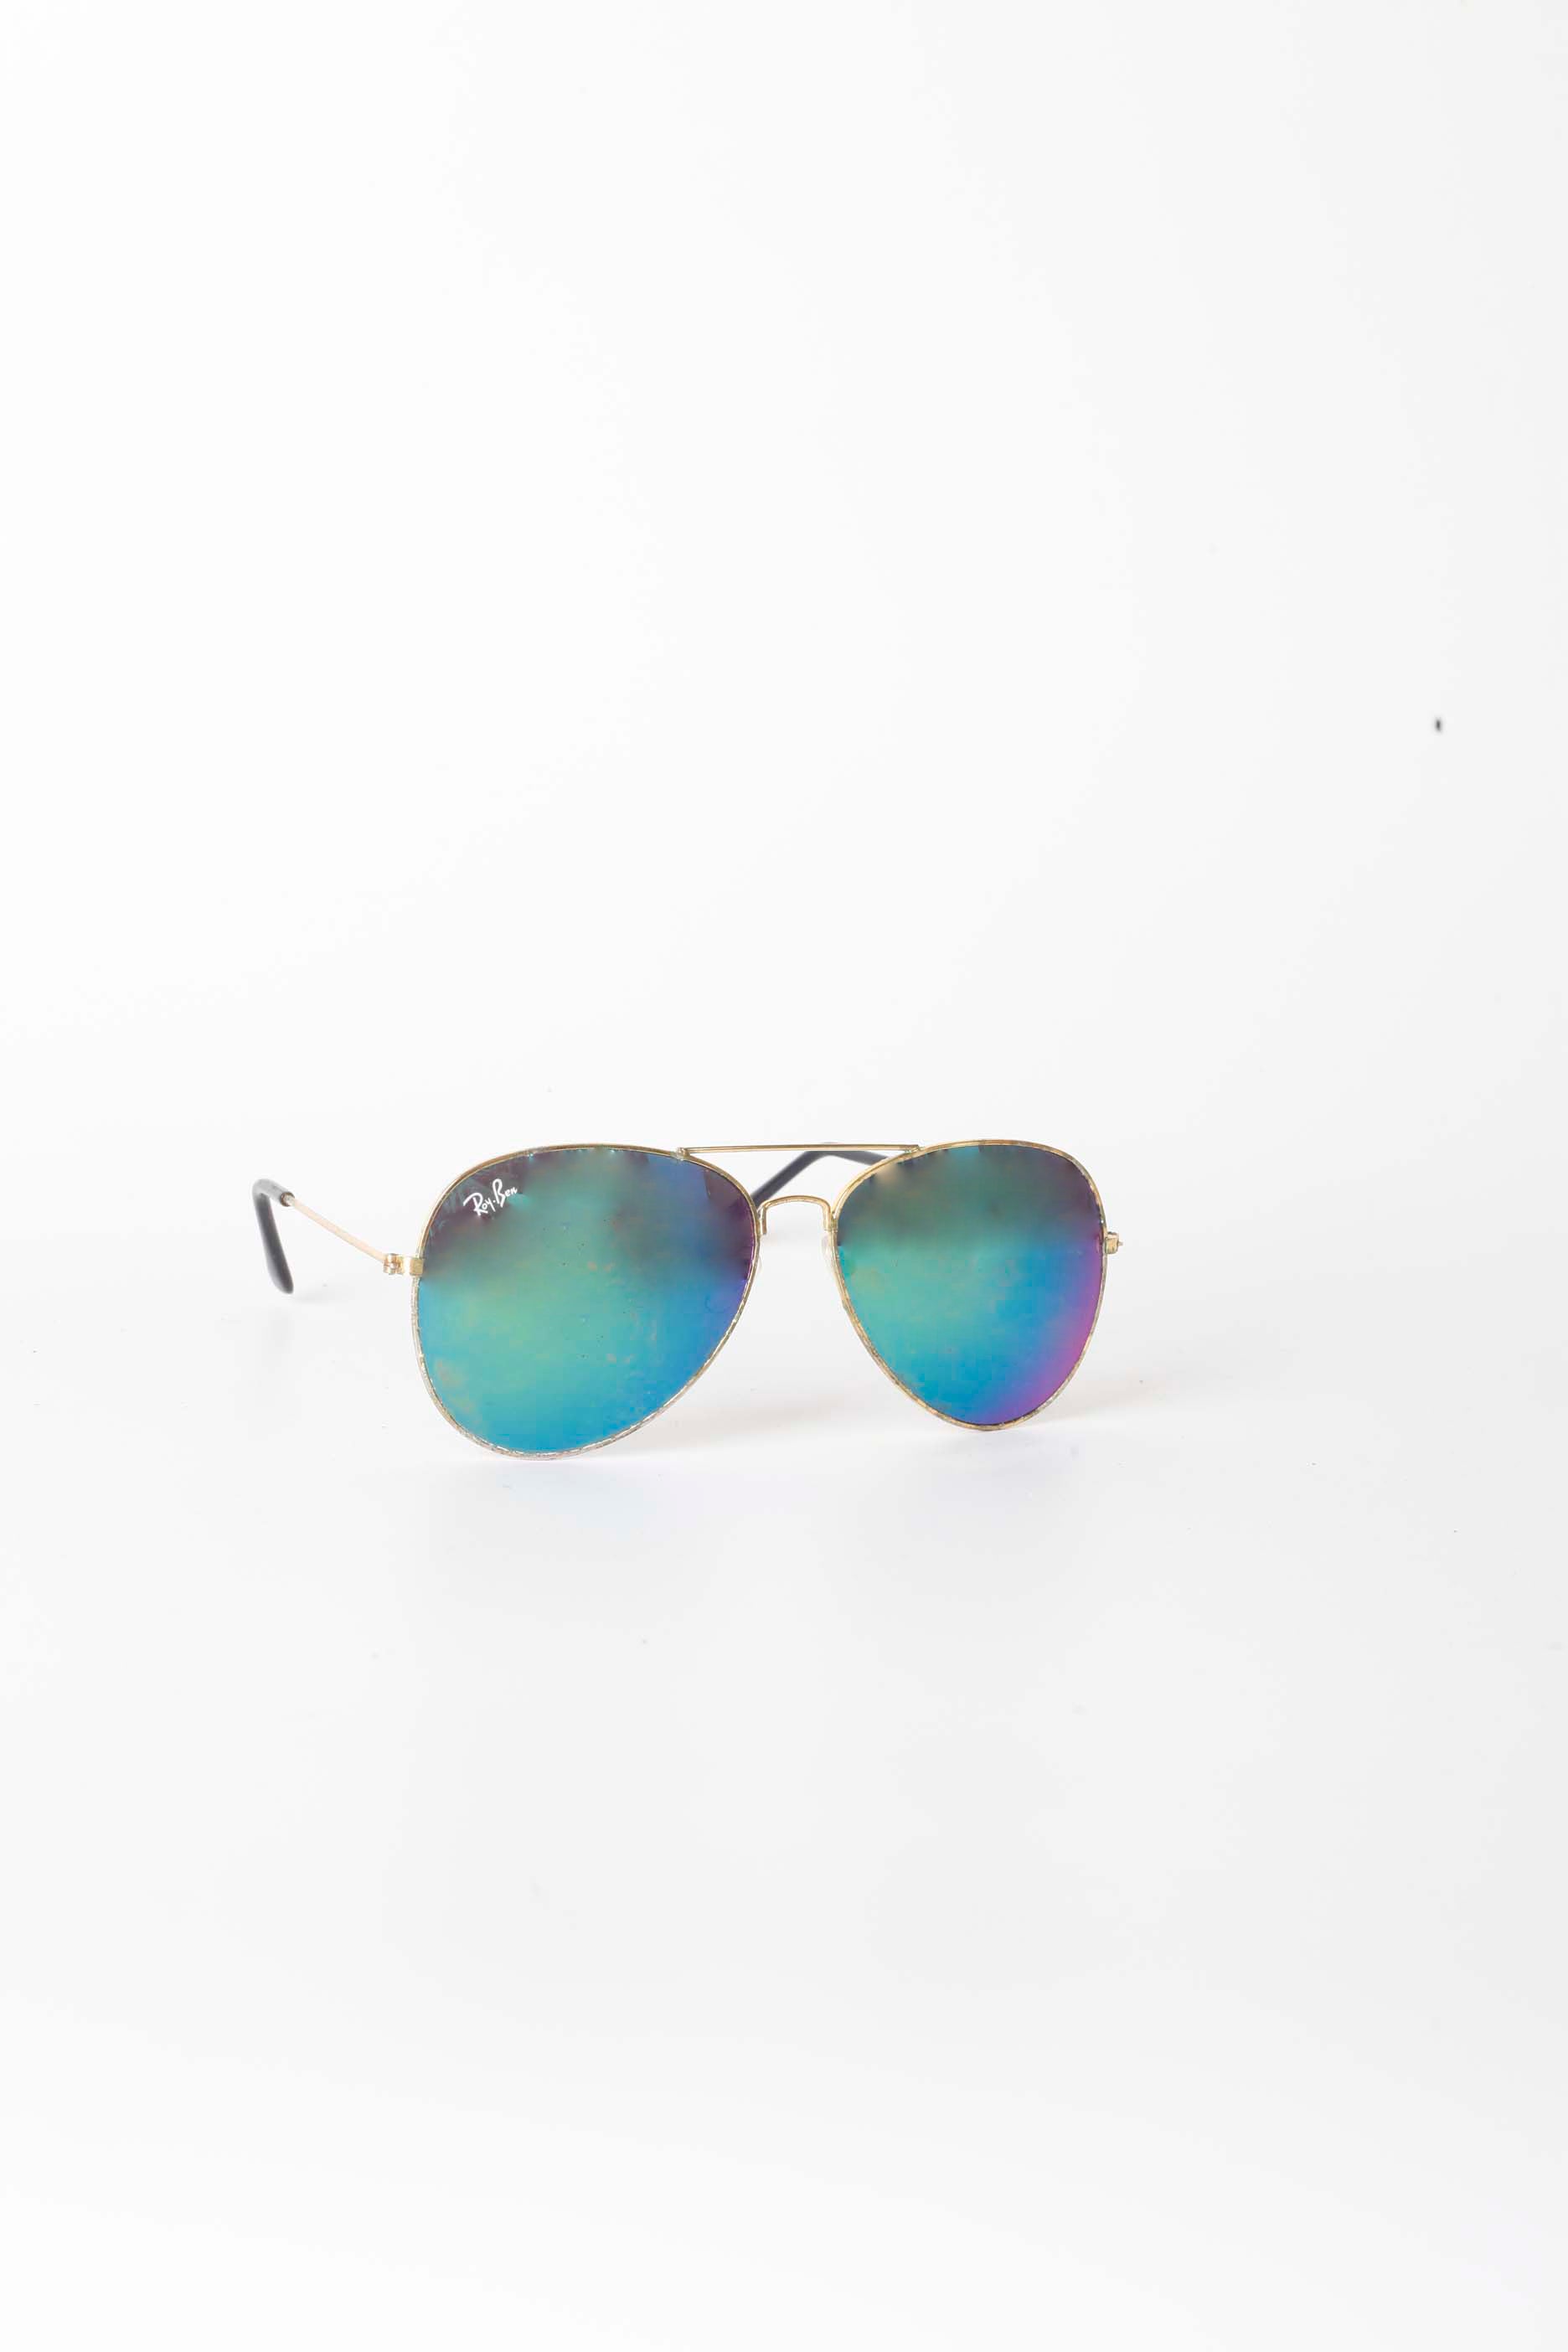 Gold Aviator Sunglasses with Blue Tint